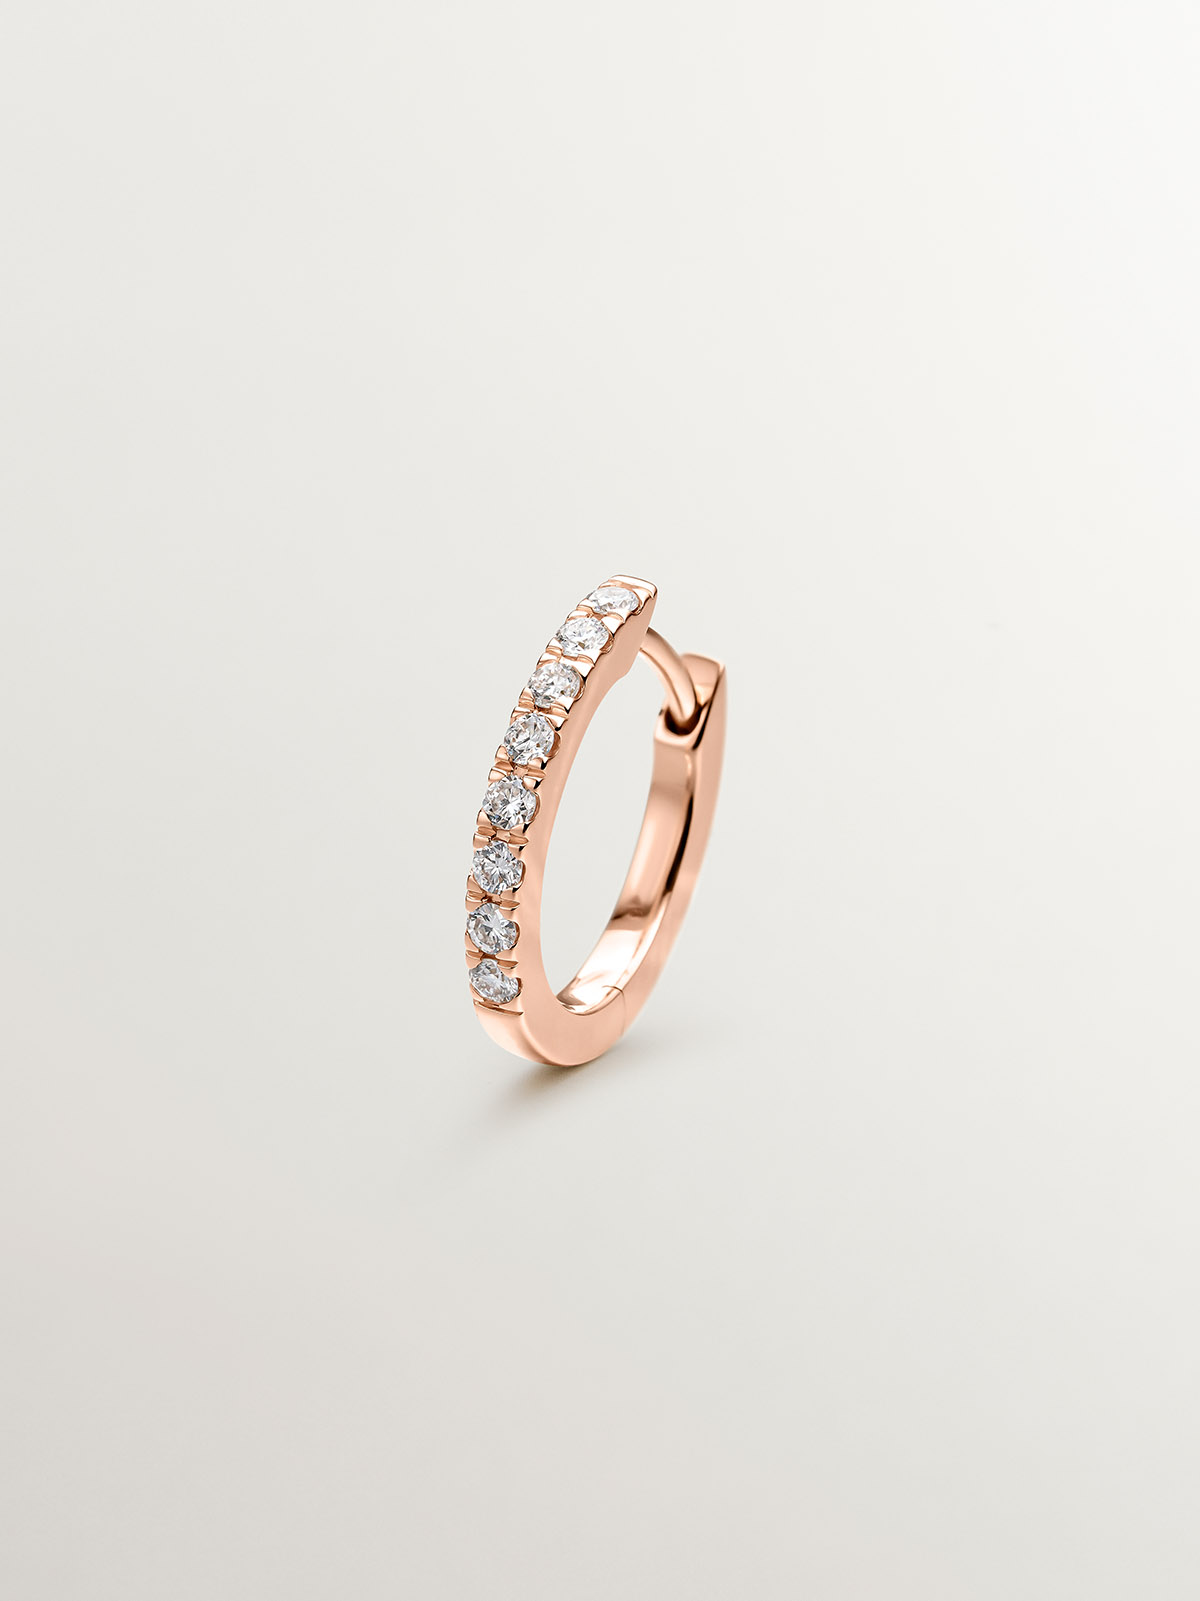 Individual small hoop earring made of 18K rose gold with 0.08ct diamonds.